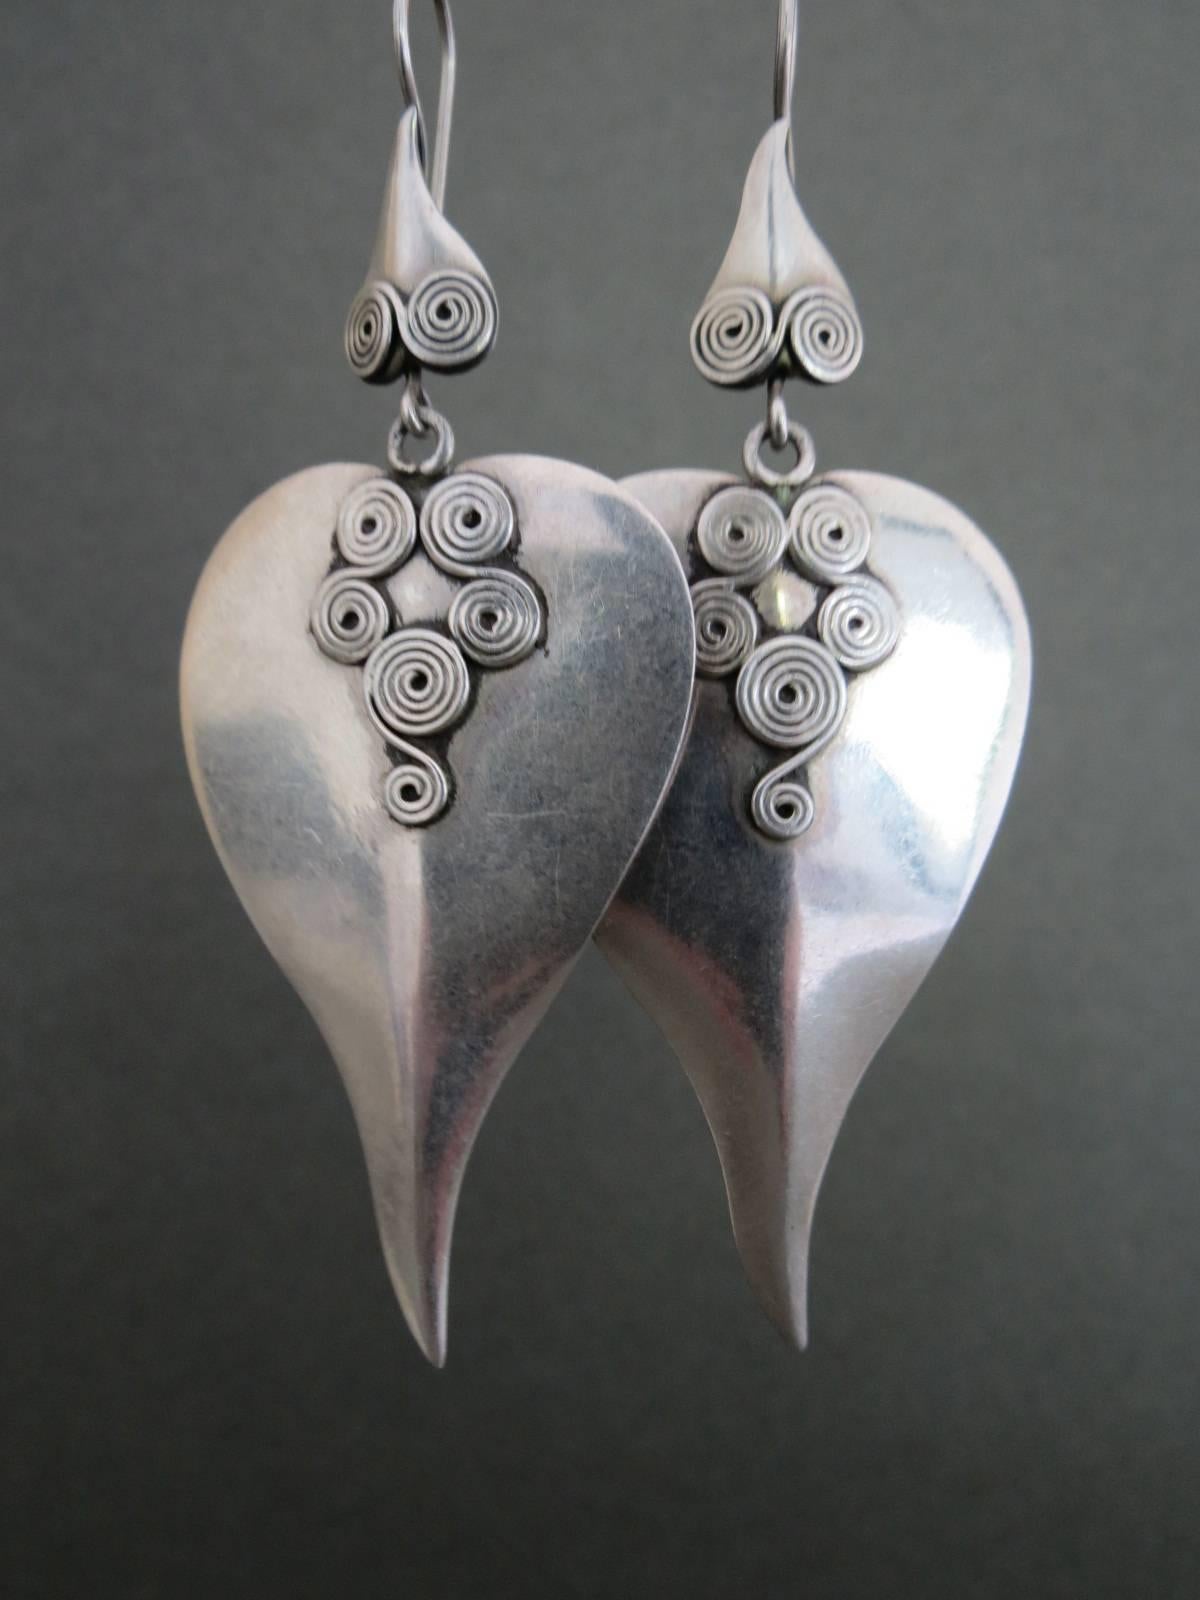 This vintage set of Danish silver earrings would be lovely addition to your collection.
Item Specifics
Height: 8cm (approx 3.00